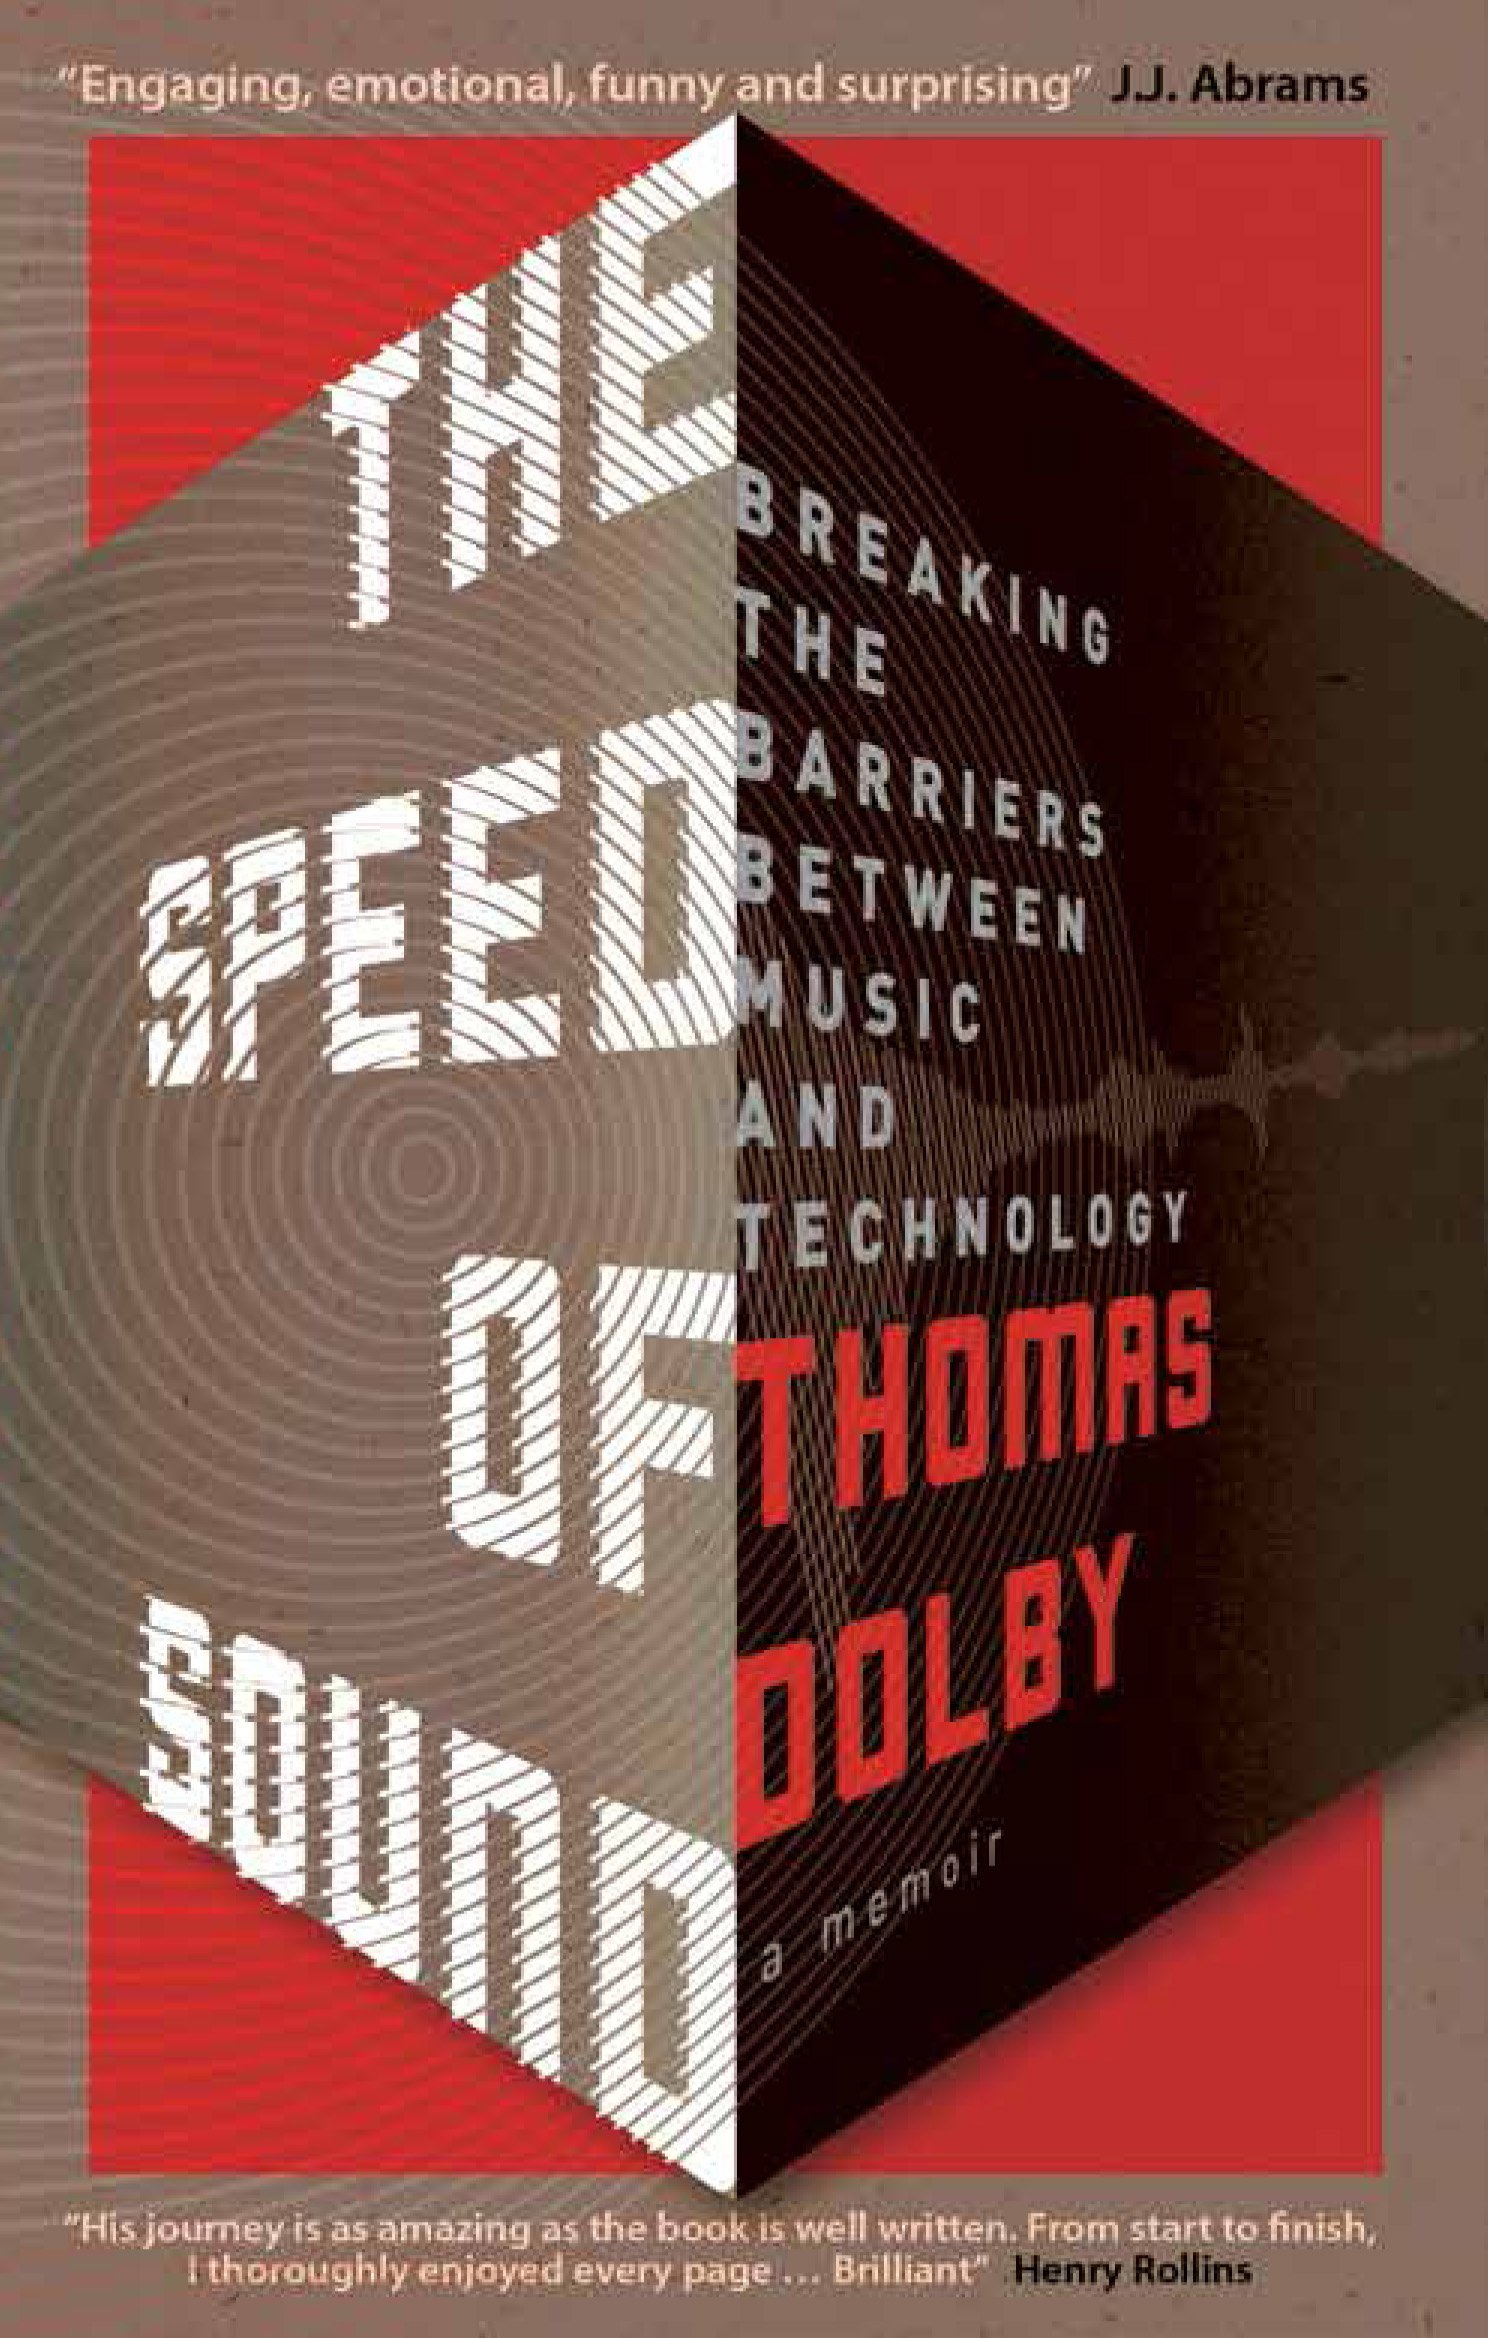 The Speed Of Sound | Thomas Dolby